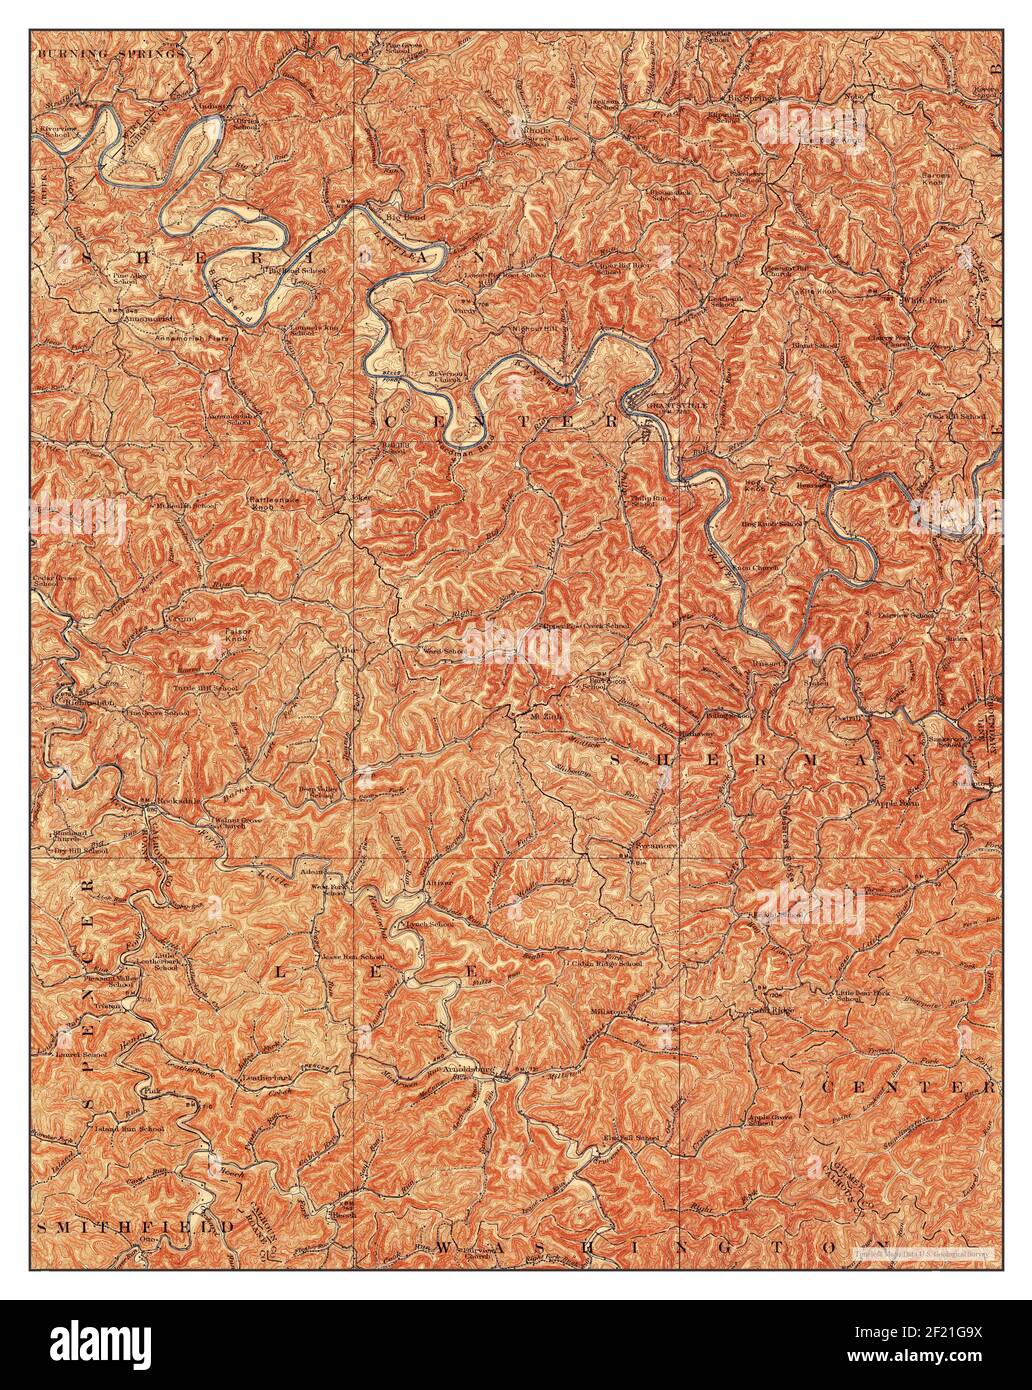 Arnoldsburg, West Virginia, map 1927, 1:62500, United States of America by Timeless Maps, data U.S. Geological Survey Stock Photo